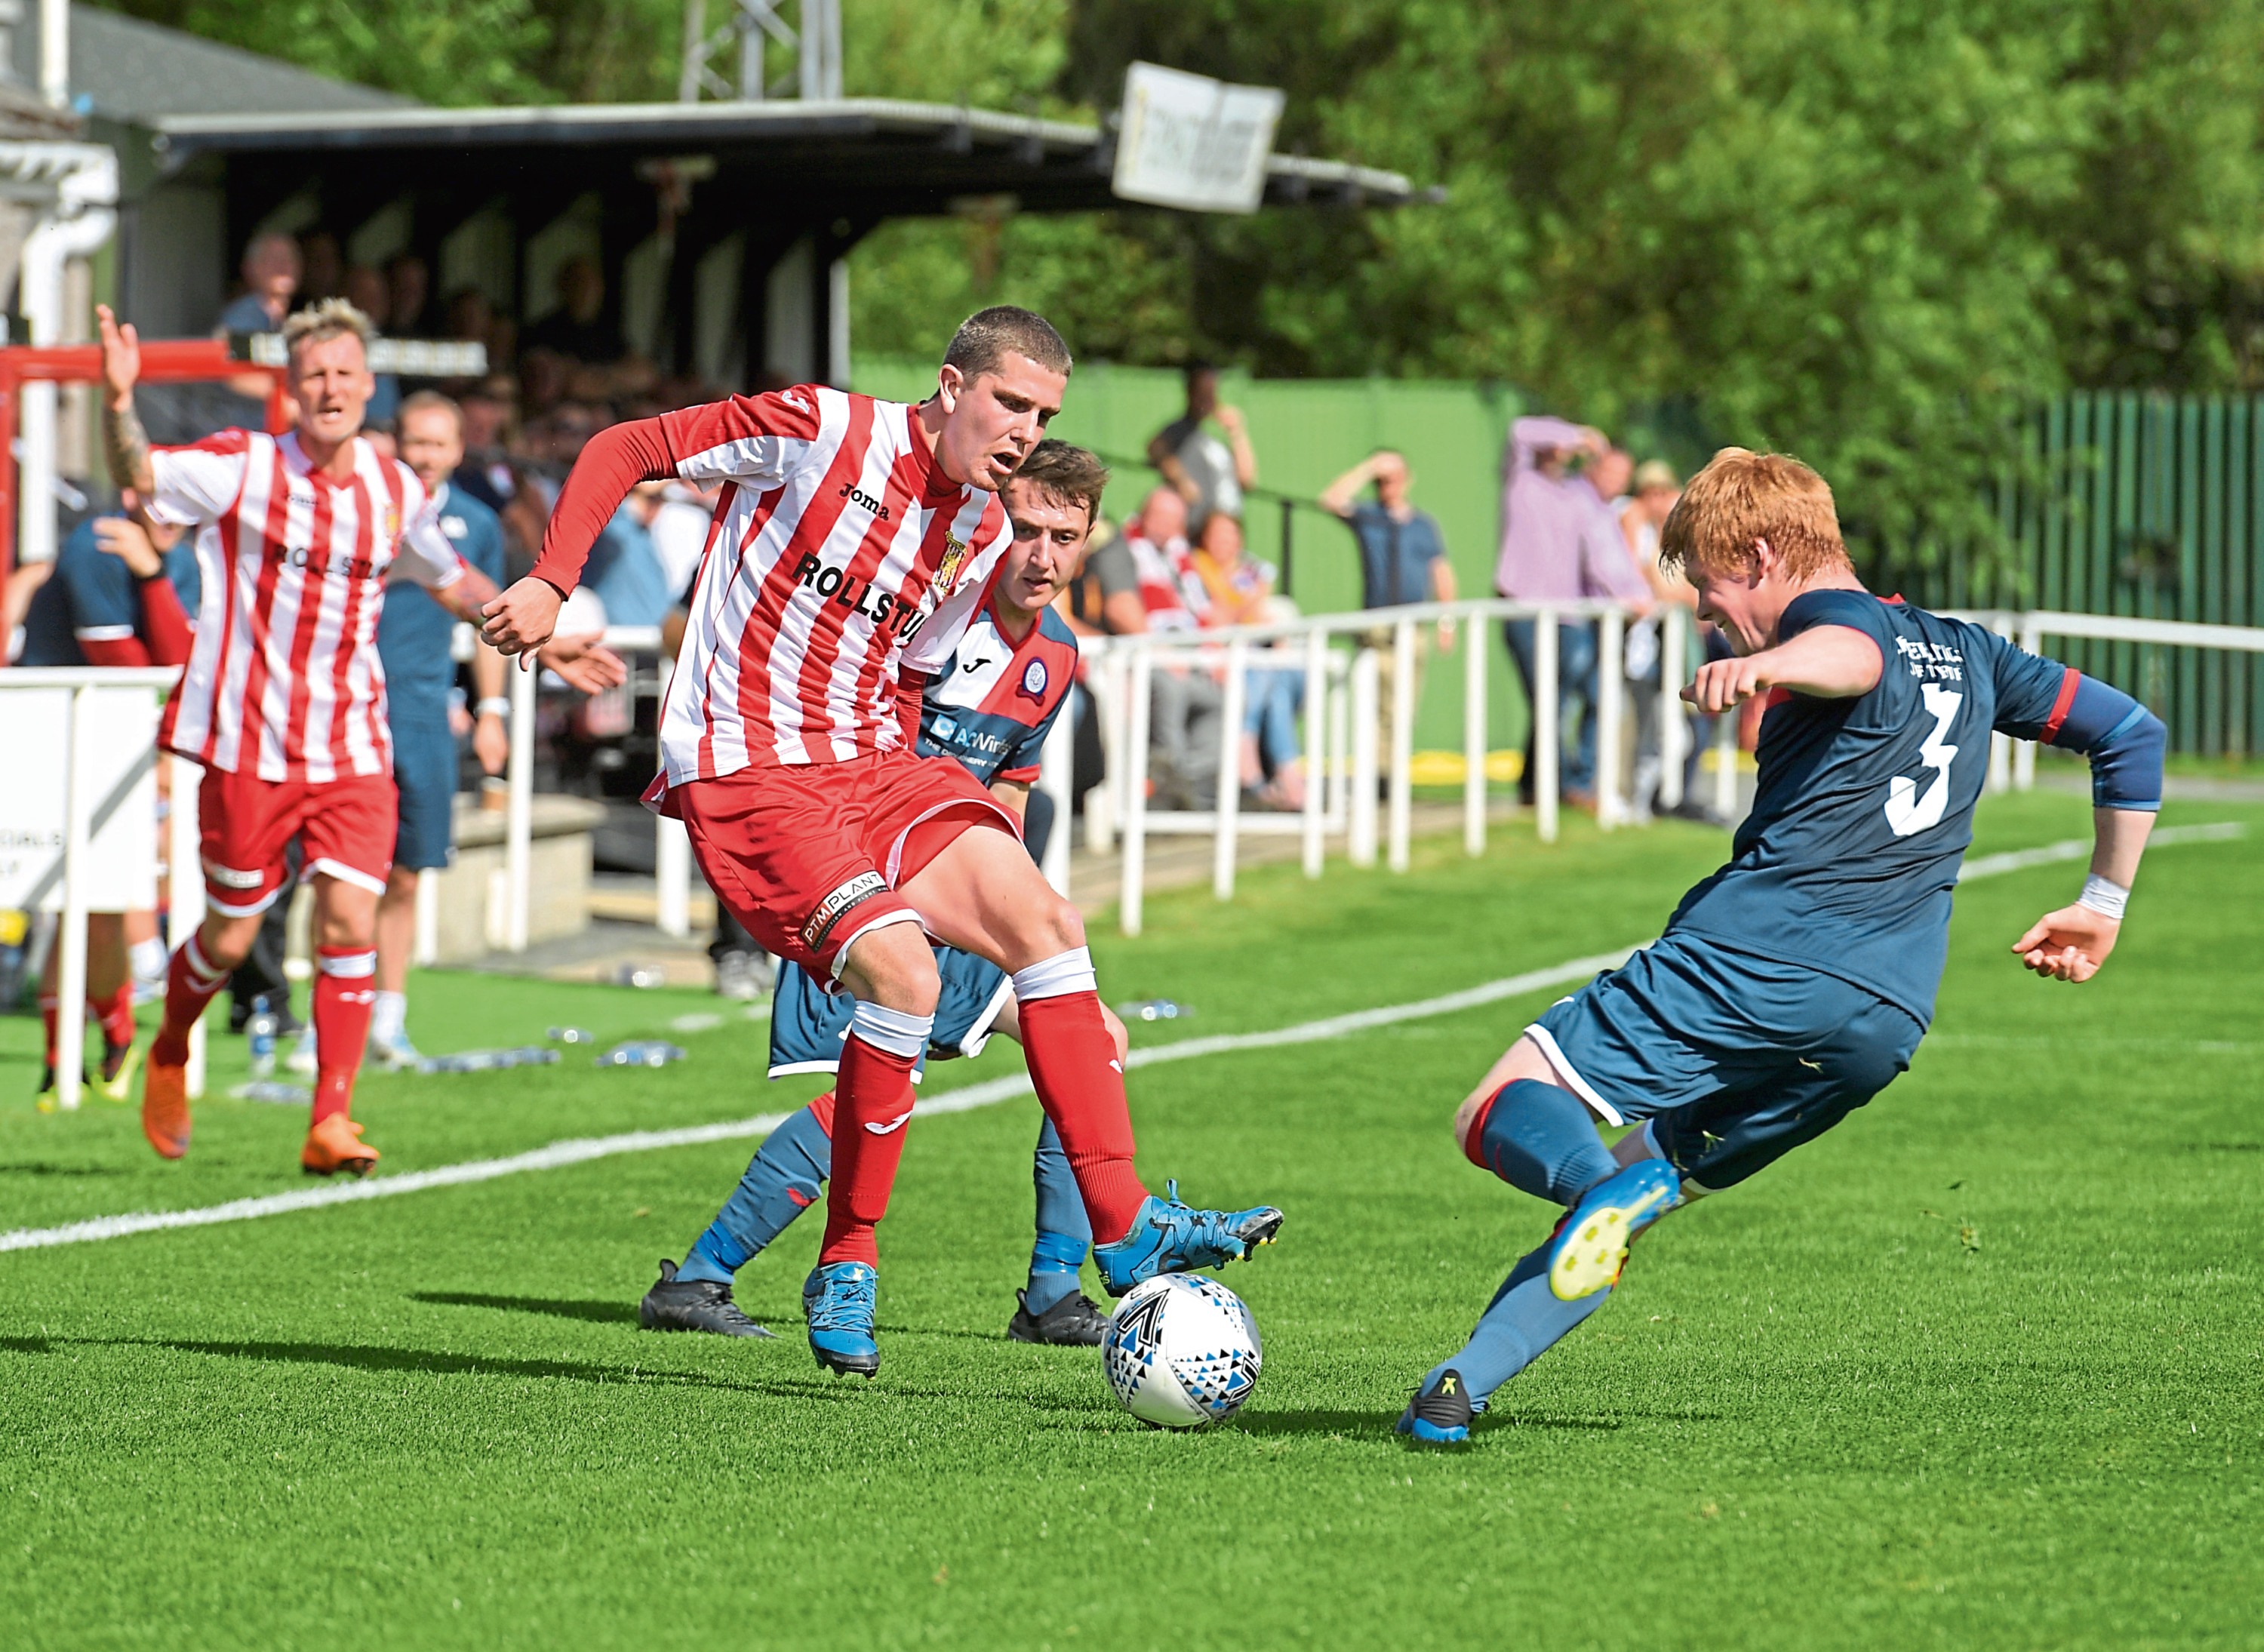 Formartine's Jonathan Crawford and Turriff's Owen Cairns.
Picture by Kath Flannery